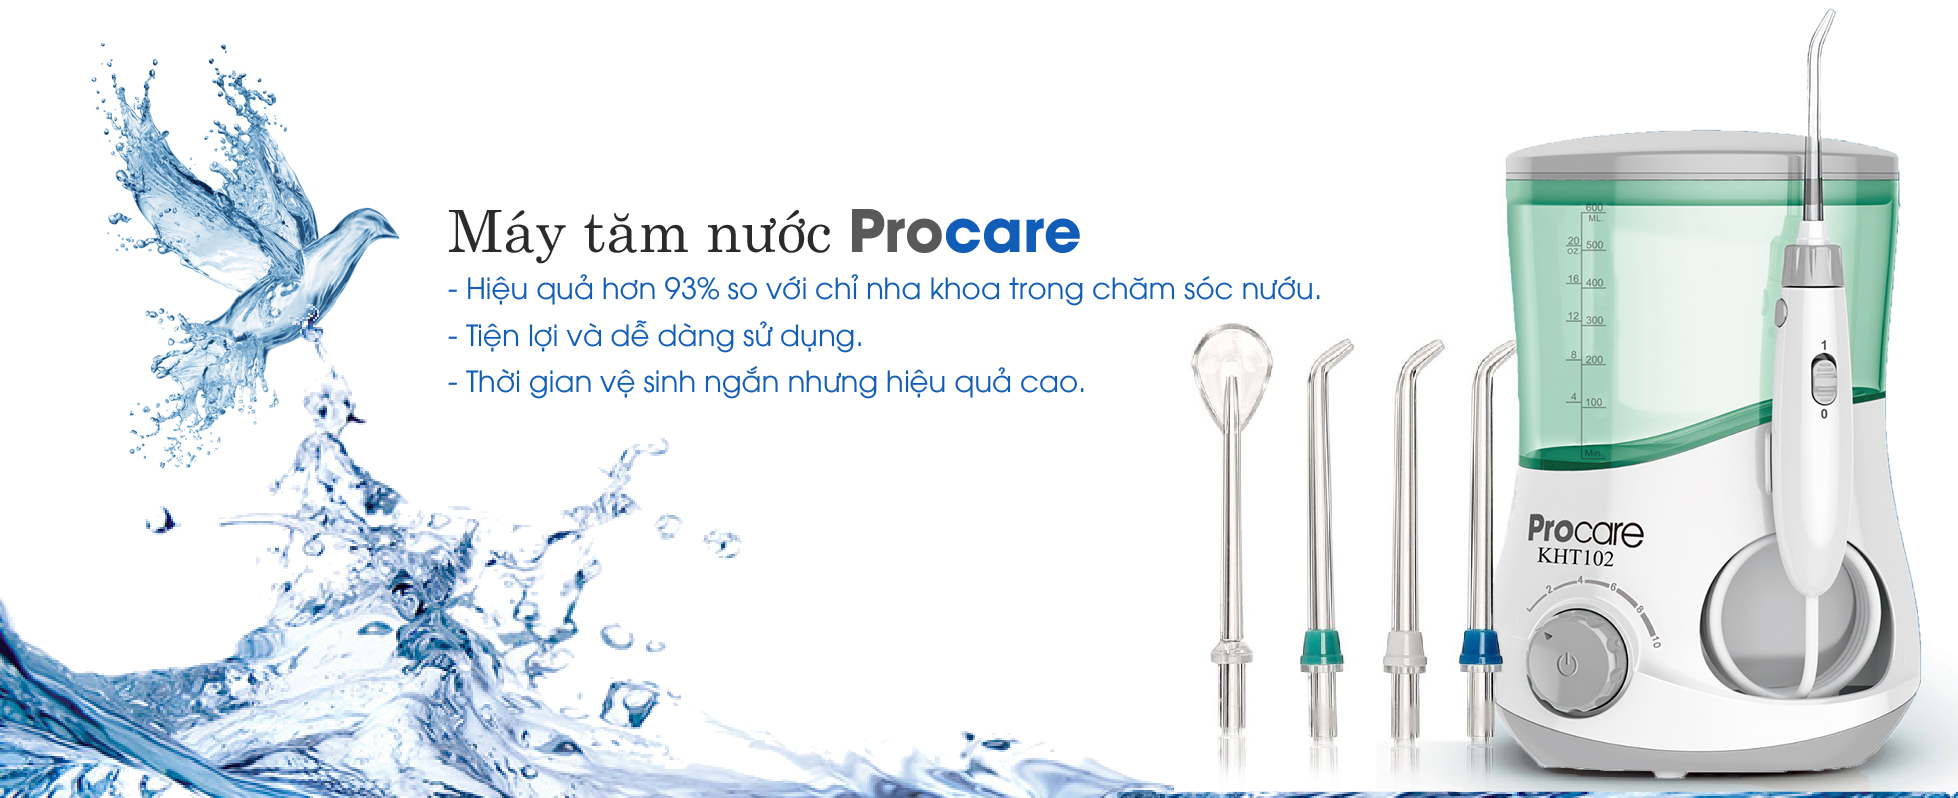 http://procare.asia/may-tam-nuoc-de-ban-kht102